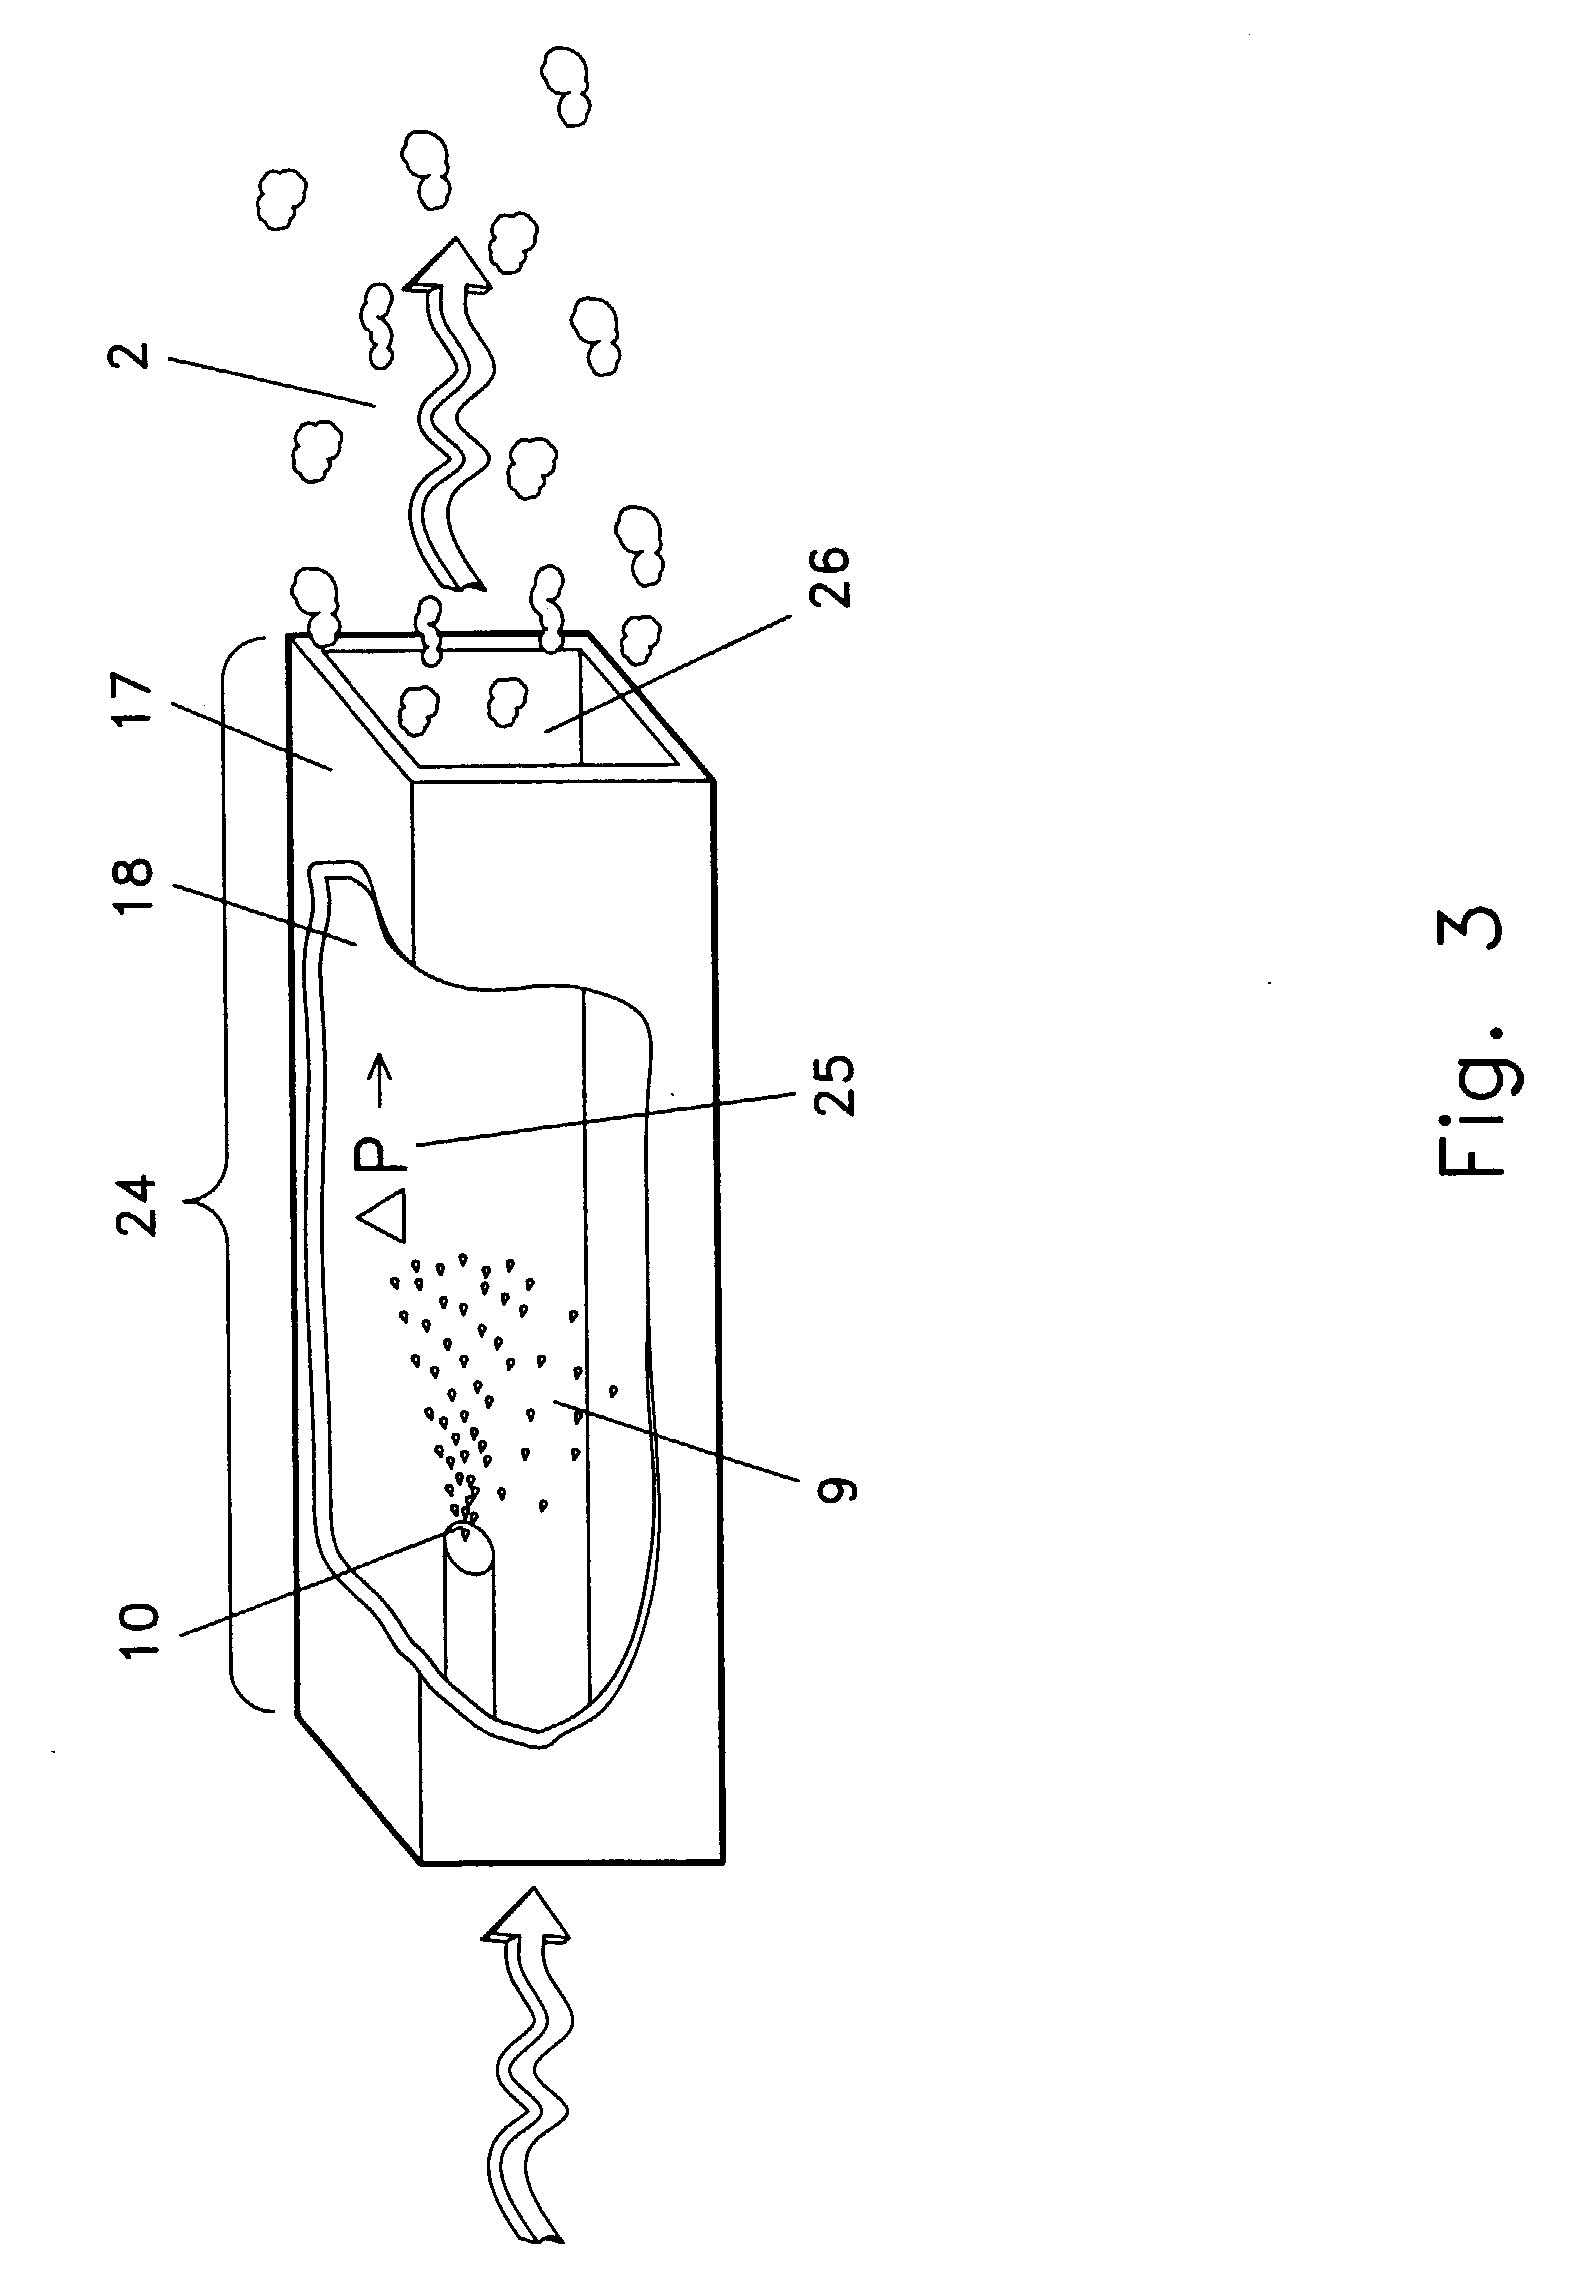 Accelarated water evaporation system